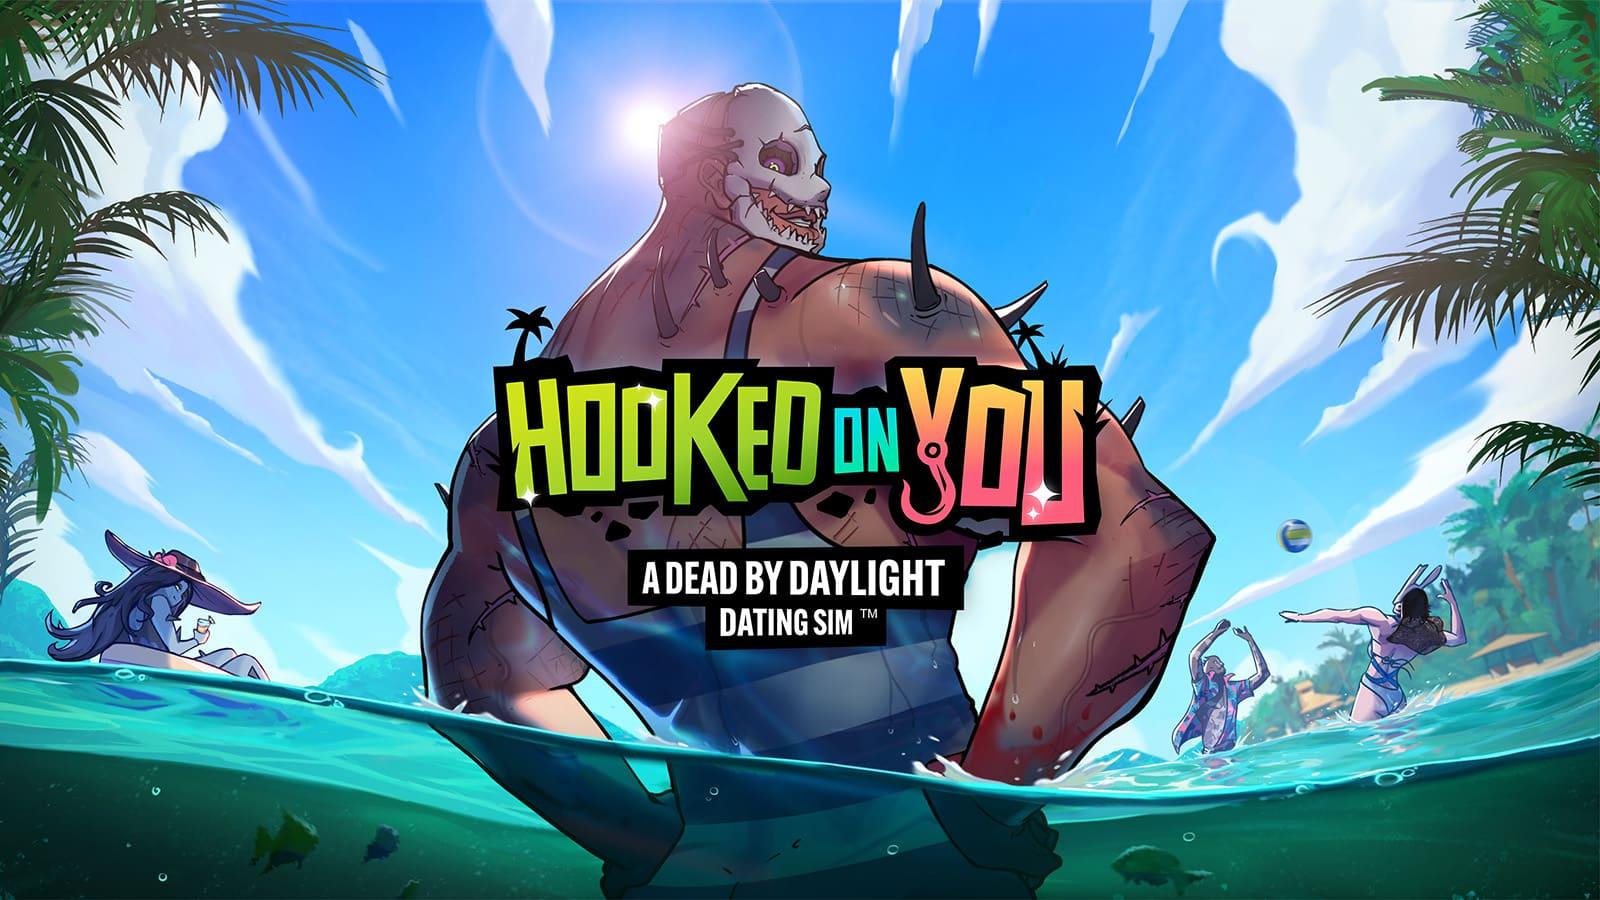 Hooked on You, Dead by Daylight Dating Simulator art